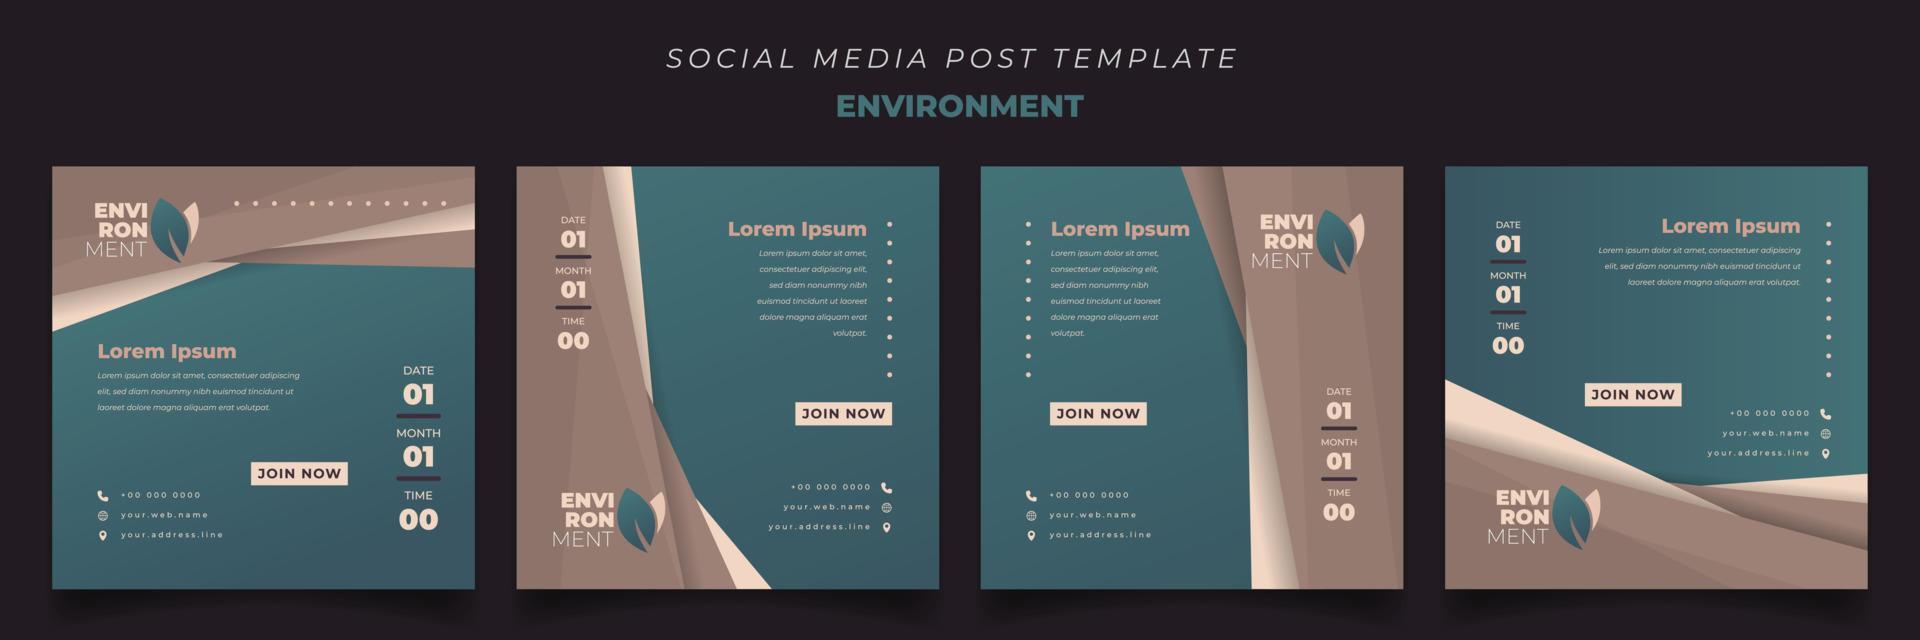 Set of social media template for environment day with green and brown background in square design vector